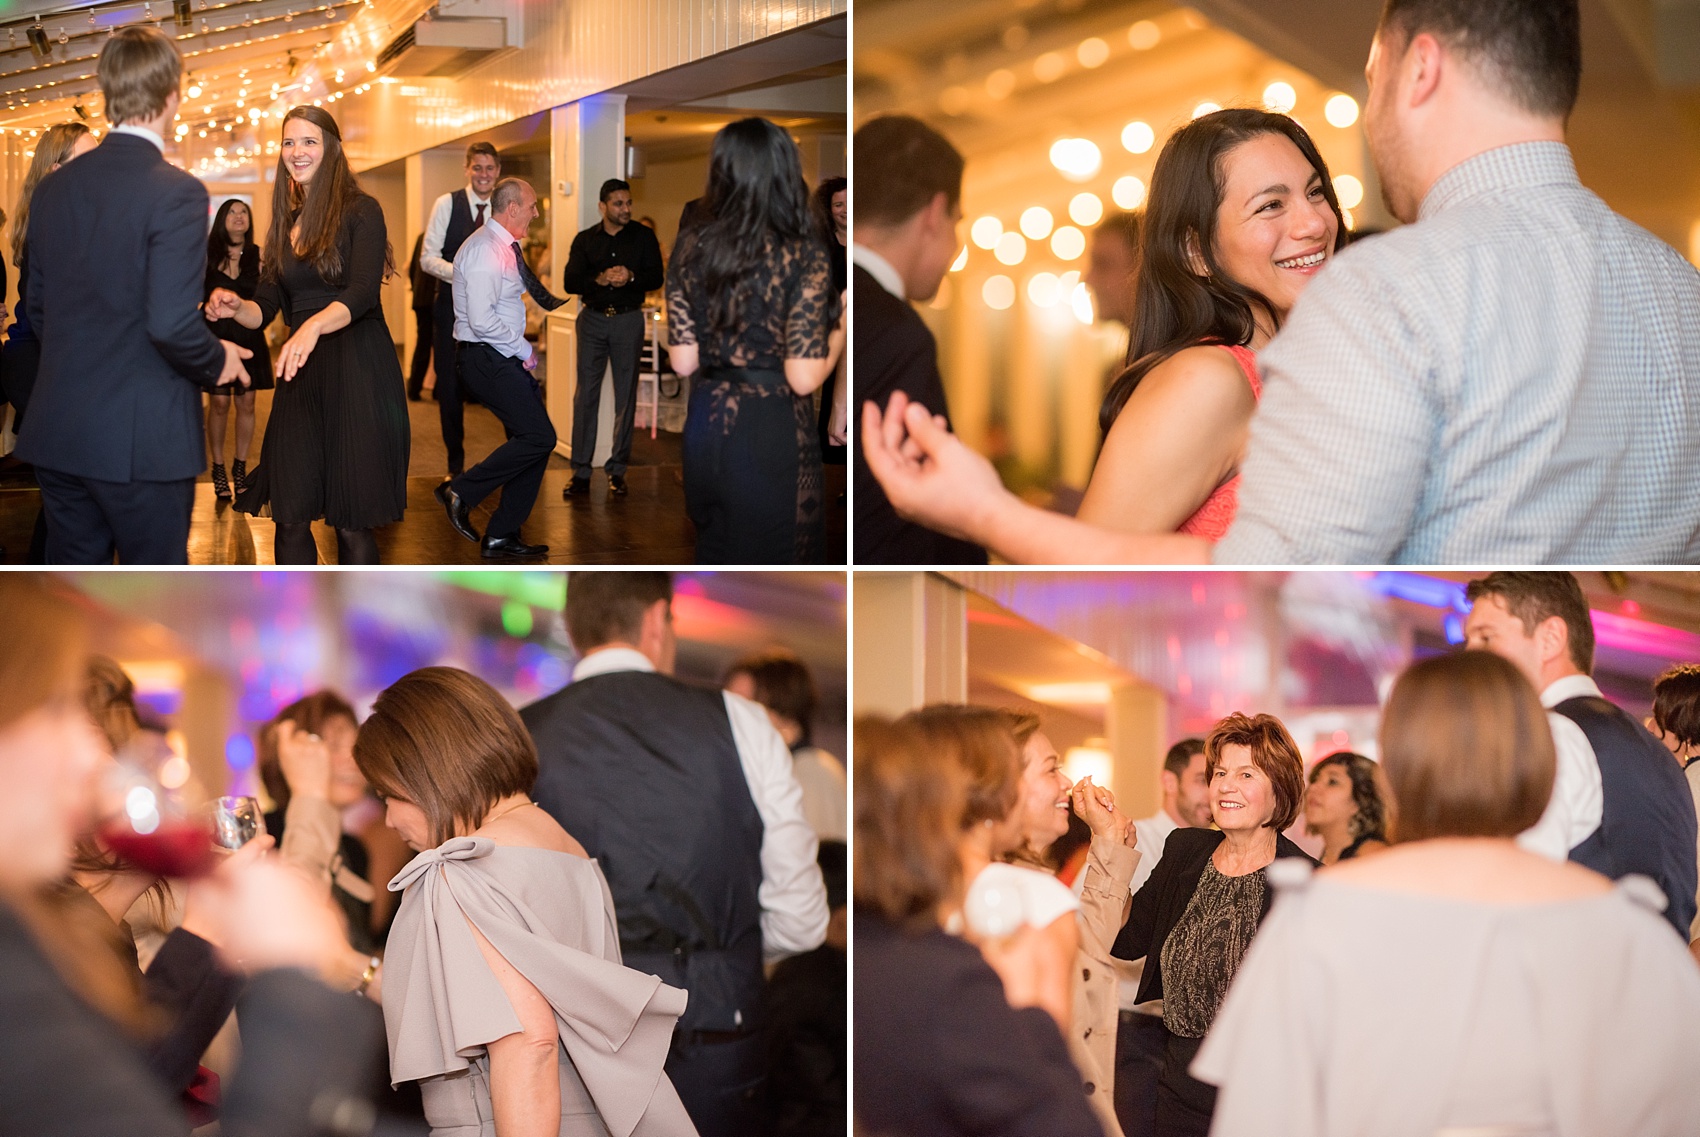 Mikkel Paige Photography photos of a wedding at Crabtree's Kittle House in Chappaqua, New York. Picture of the guests dancing during the reception.